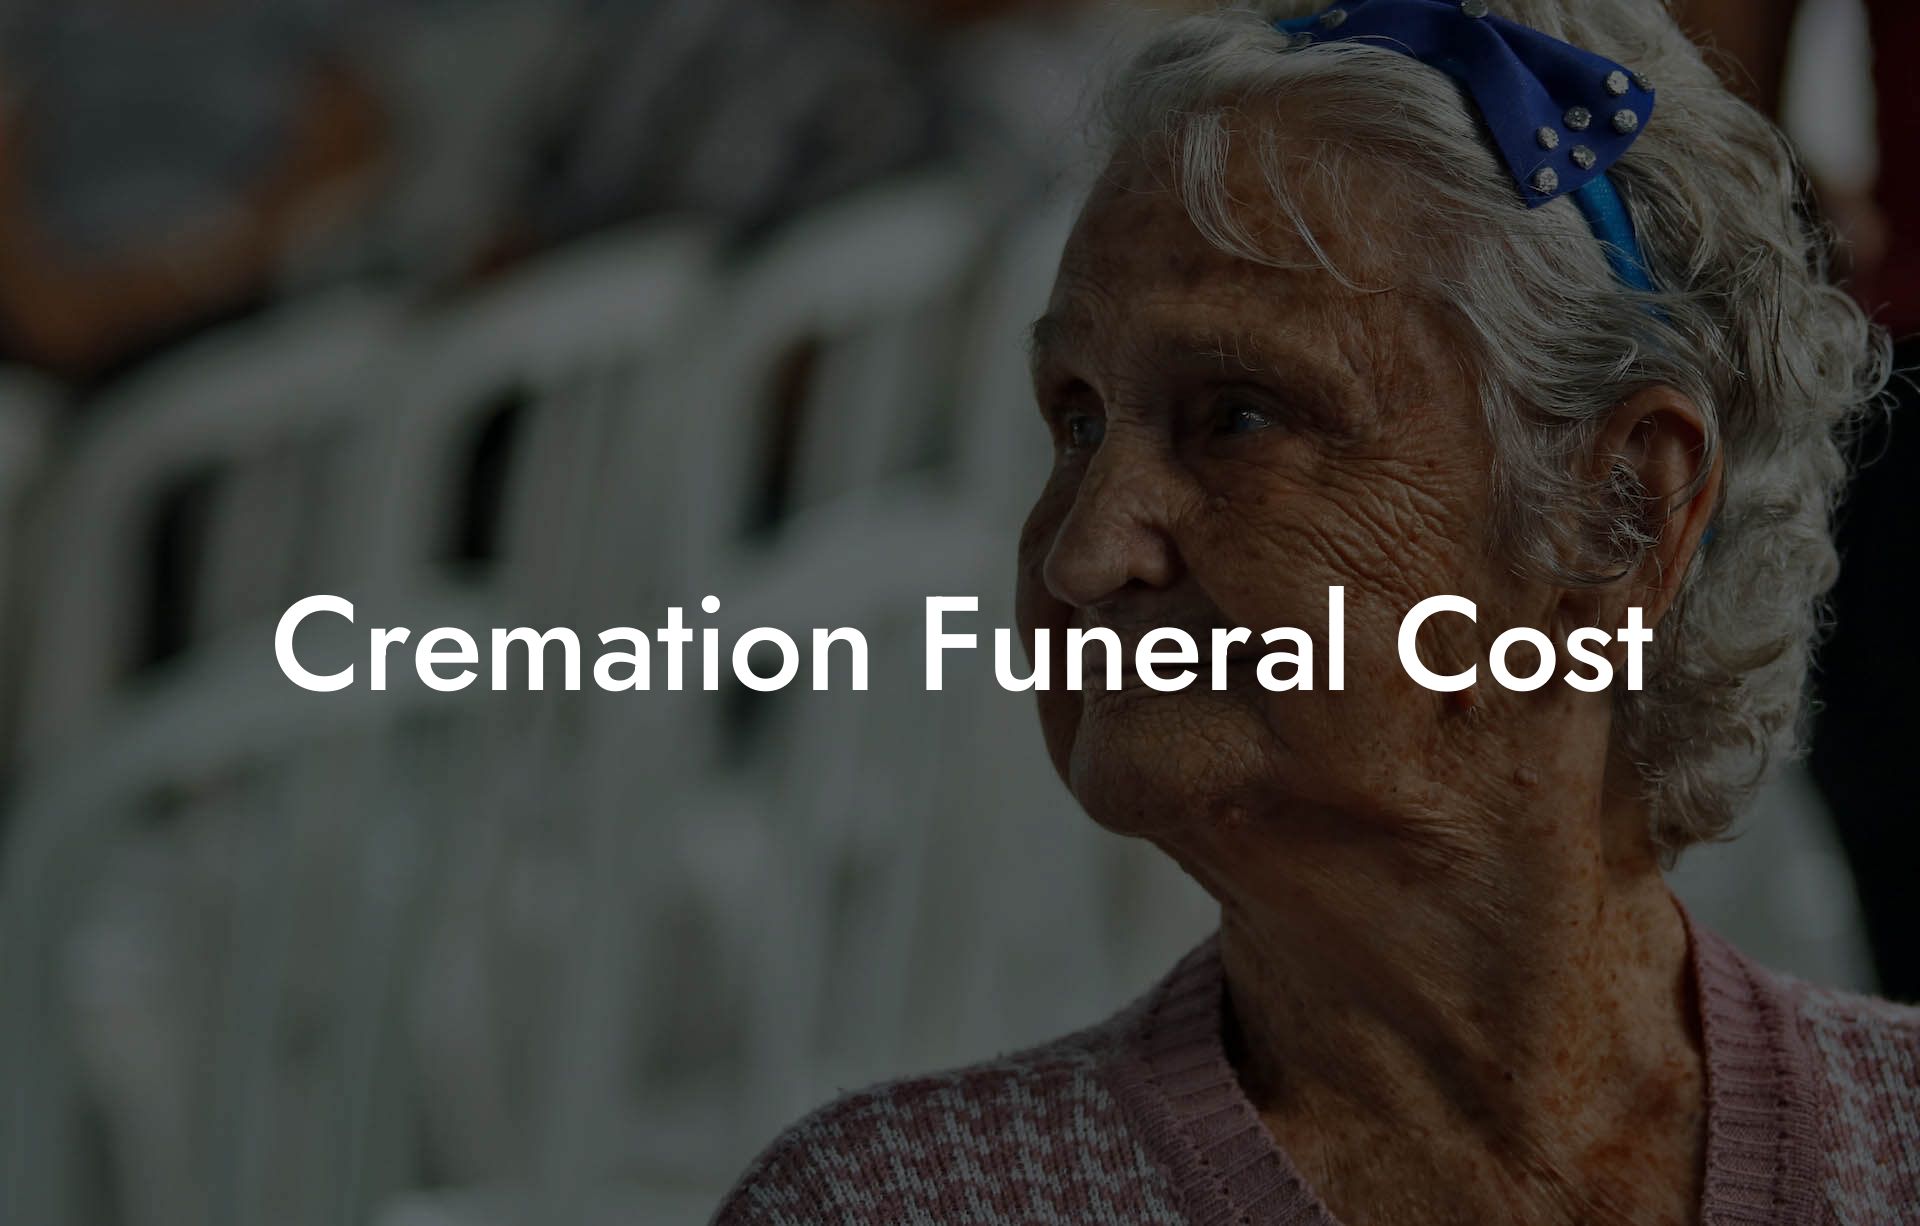 Cremation Funeral Cost